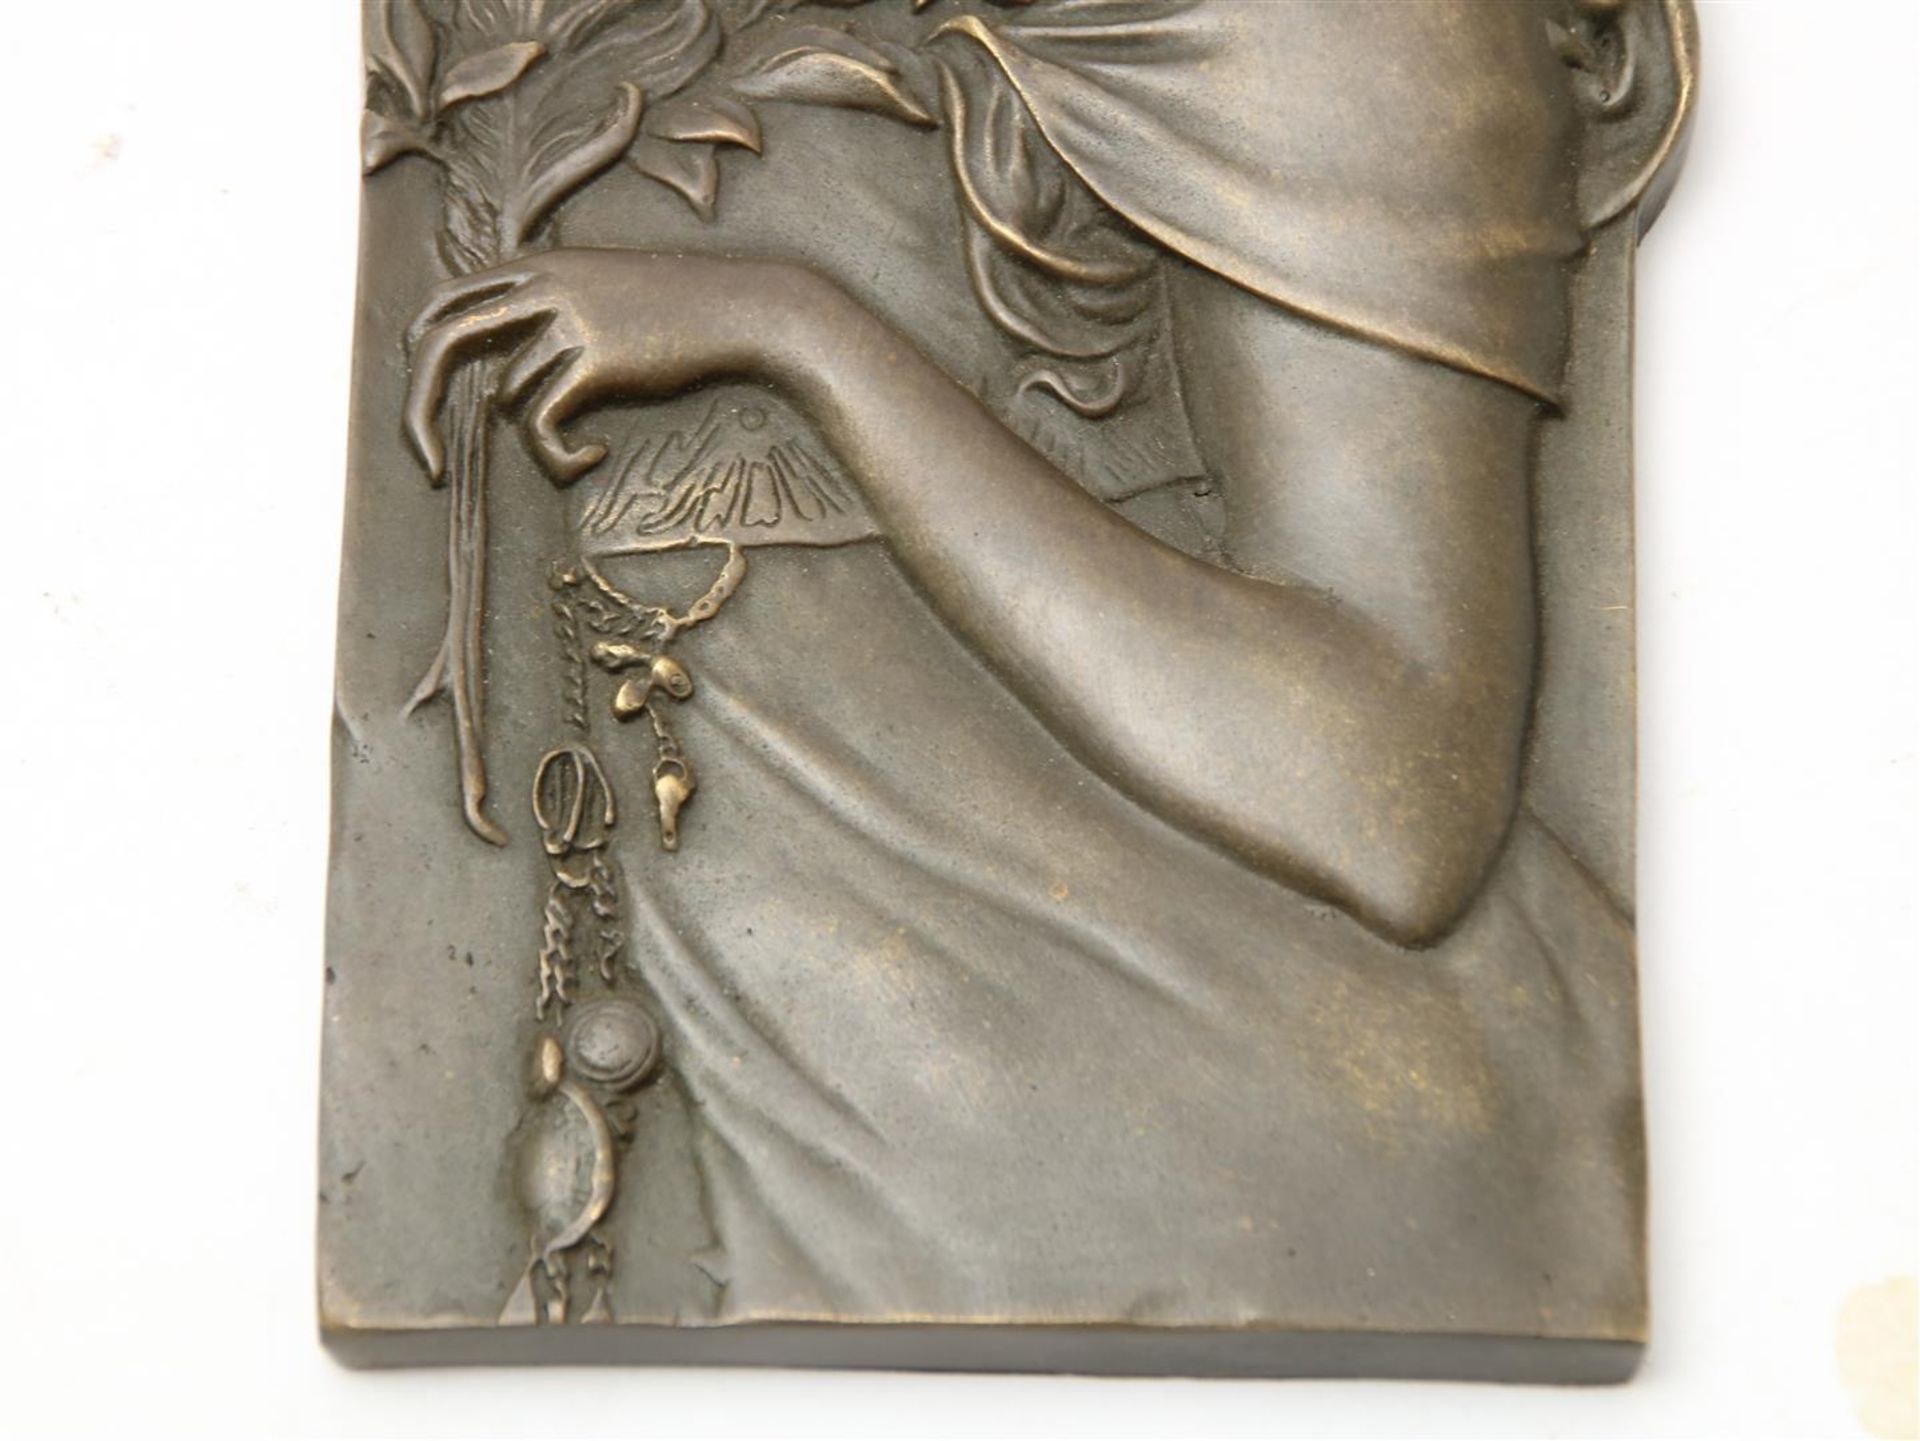 Set of bronze Art Nouveau-style plaques with relief decor of female figures, after Mucha, 23 x 9 - Image 5 of 5